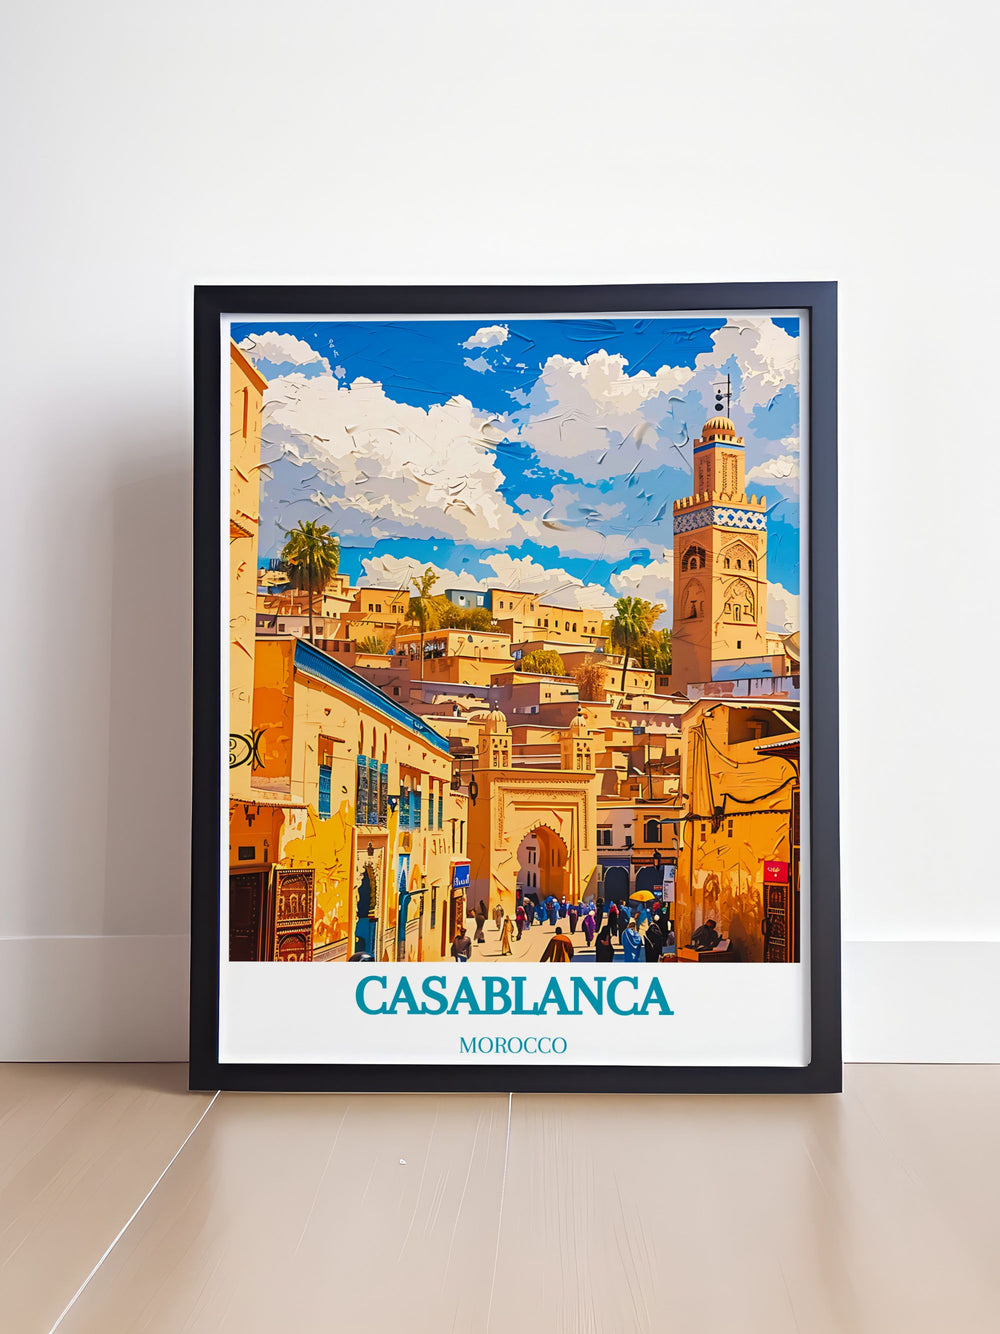 The picturesque scenery of Casablanca with Old Medina as a focal point is featured in this vibrant travel poster, perfect for adding Moroccos unique charm to your home.